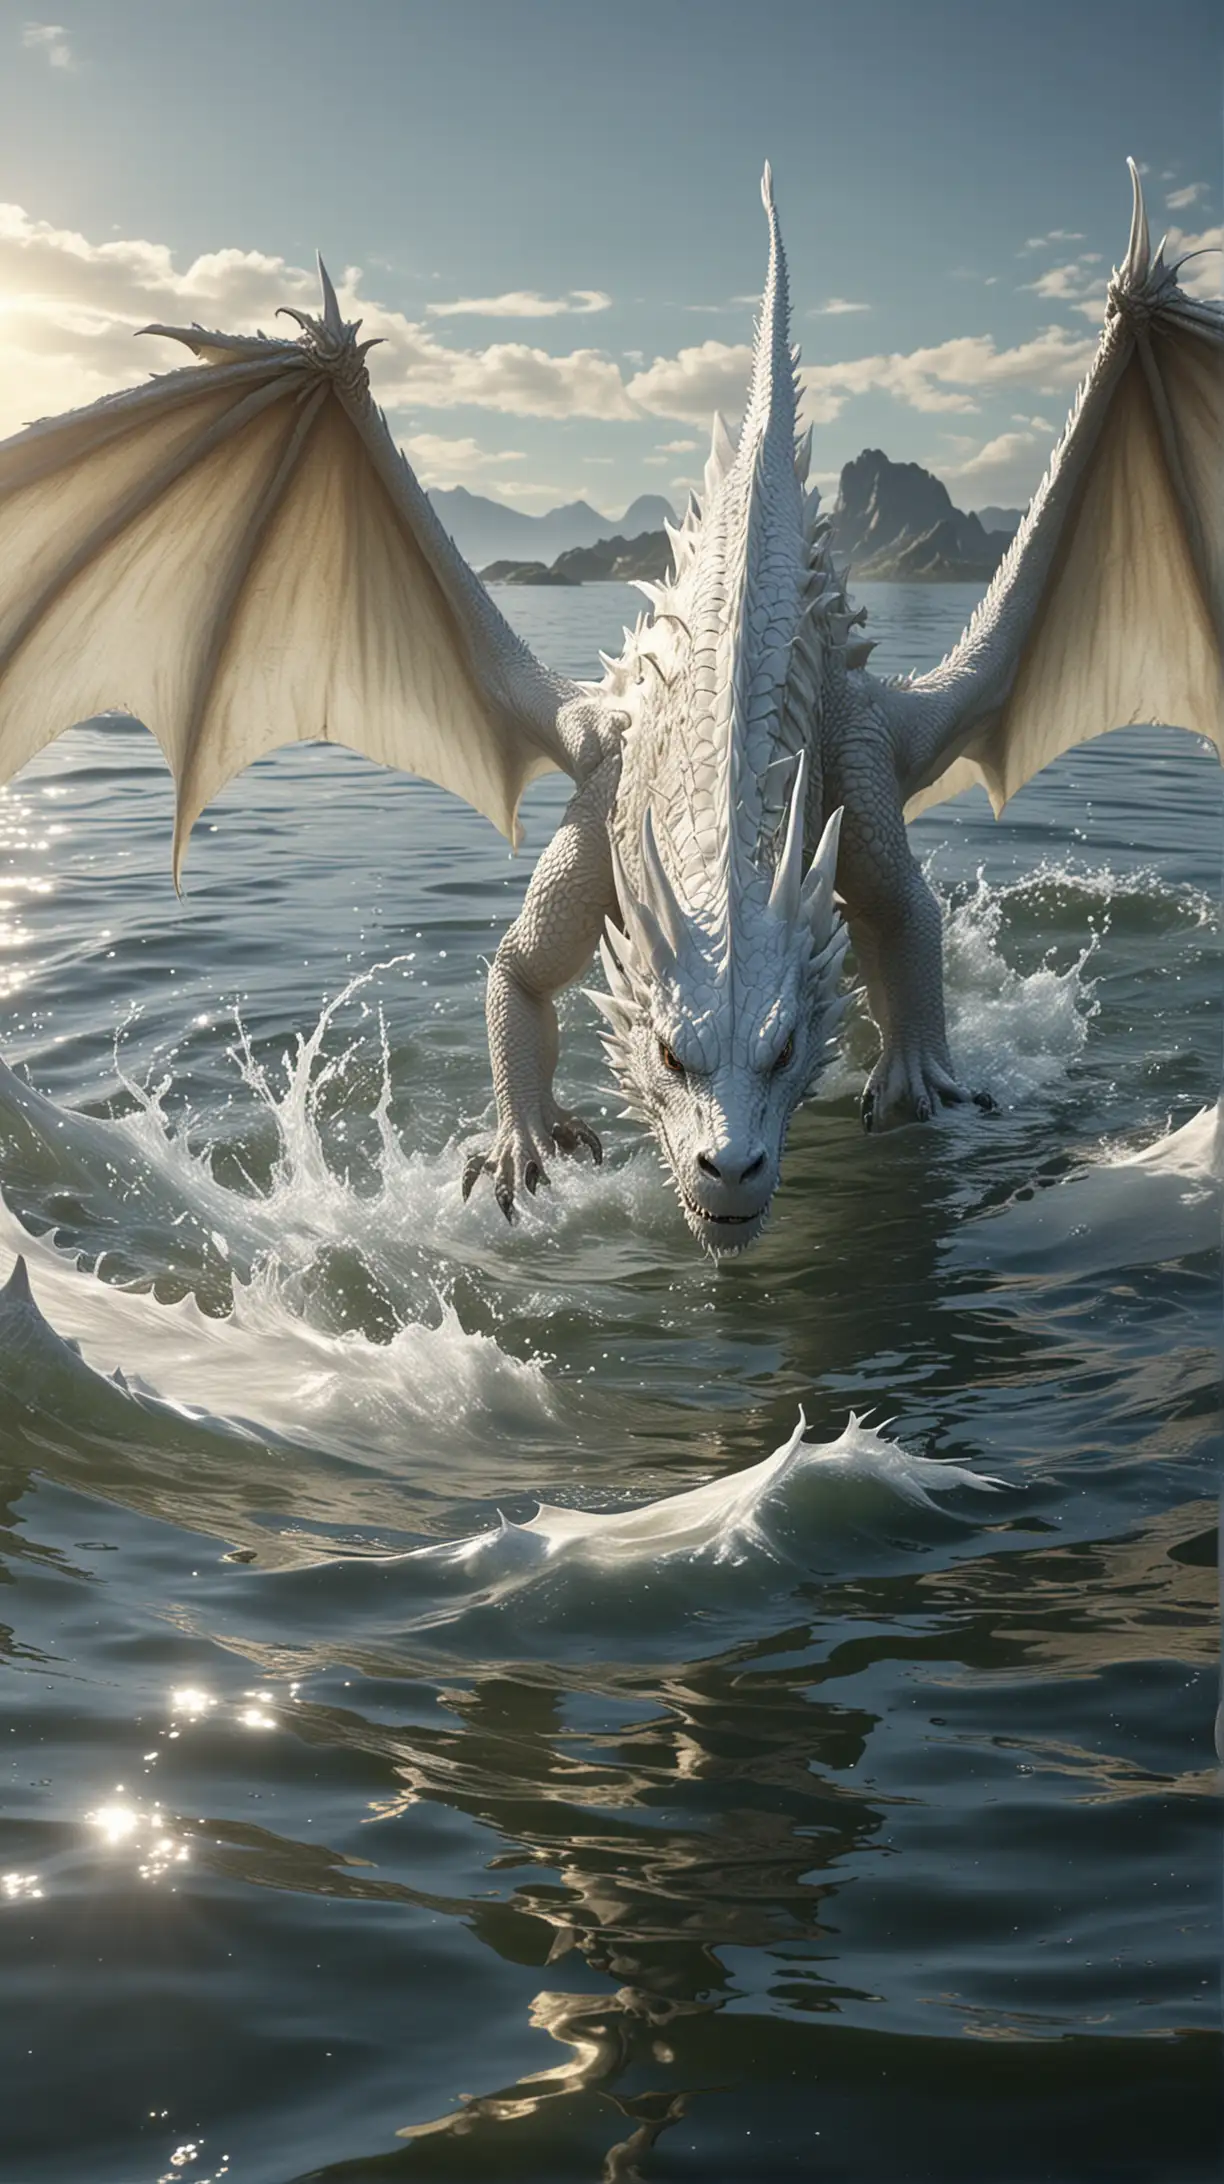 Majestic White Dragon Soaring Over Sunlit Waters